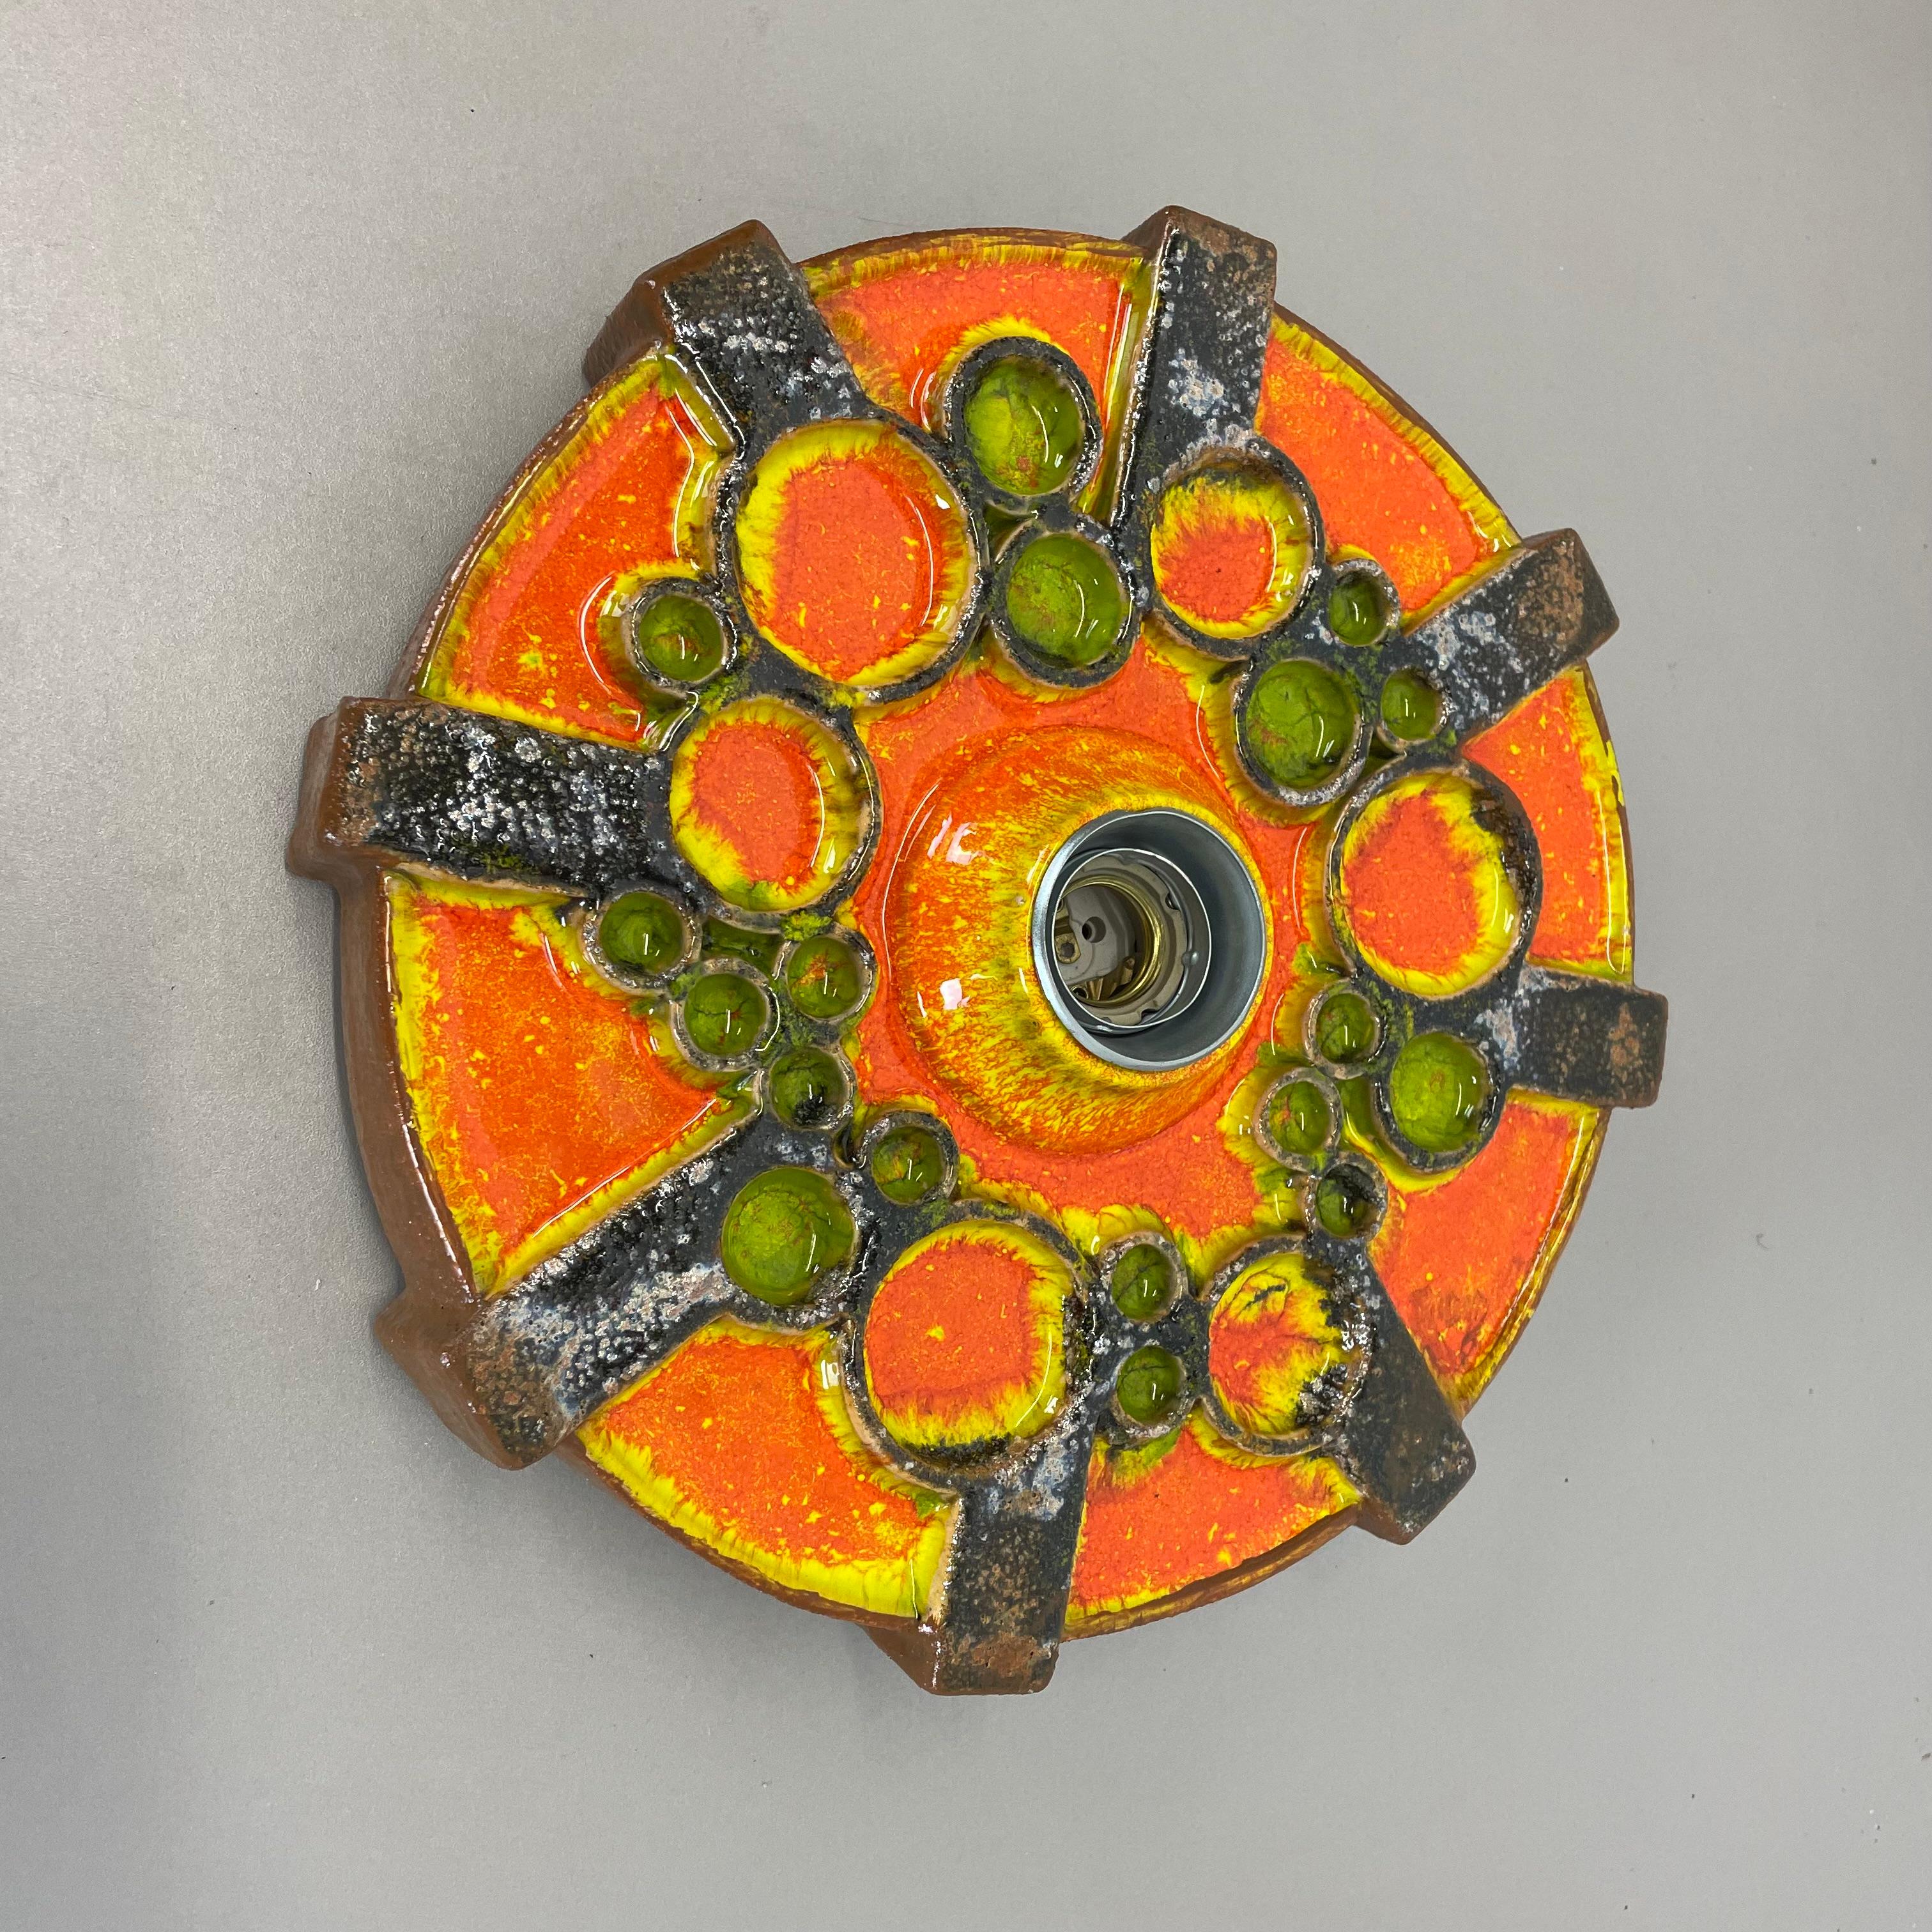 Article:

Wall light sconce


Origin:

Germany.



Age:

1970s.



Description:

Original 1970s modernist German wall light made of ceramic in fat lava optic. This super rare light was produced in the 1970s in a very colorful POP ART design with a